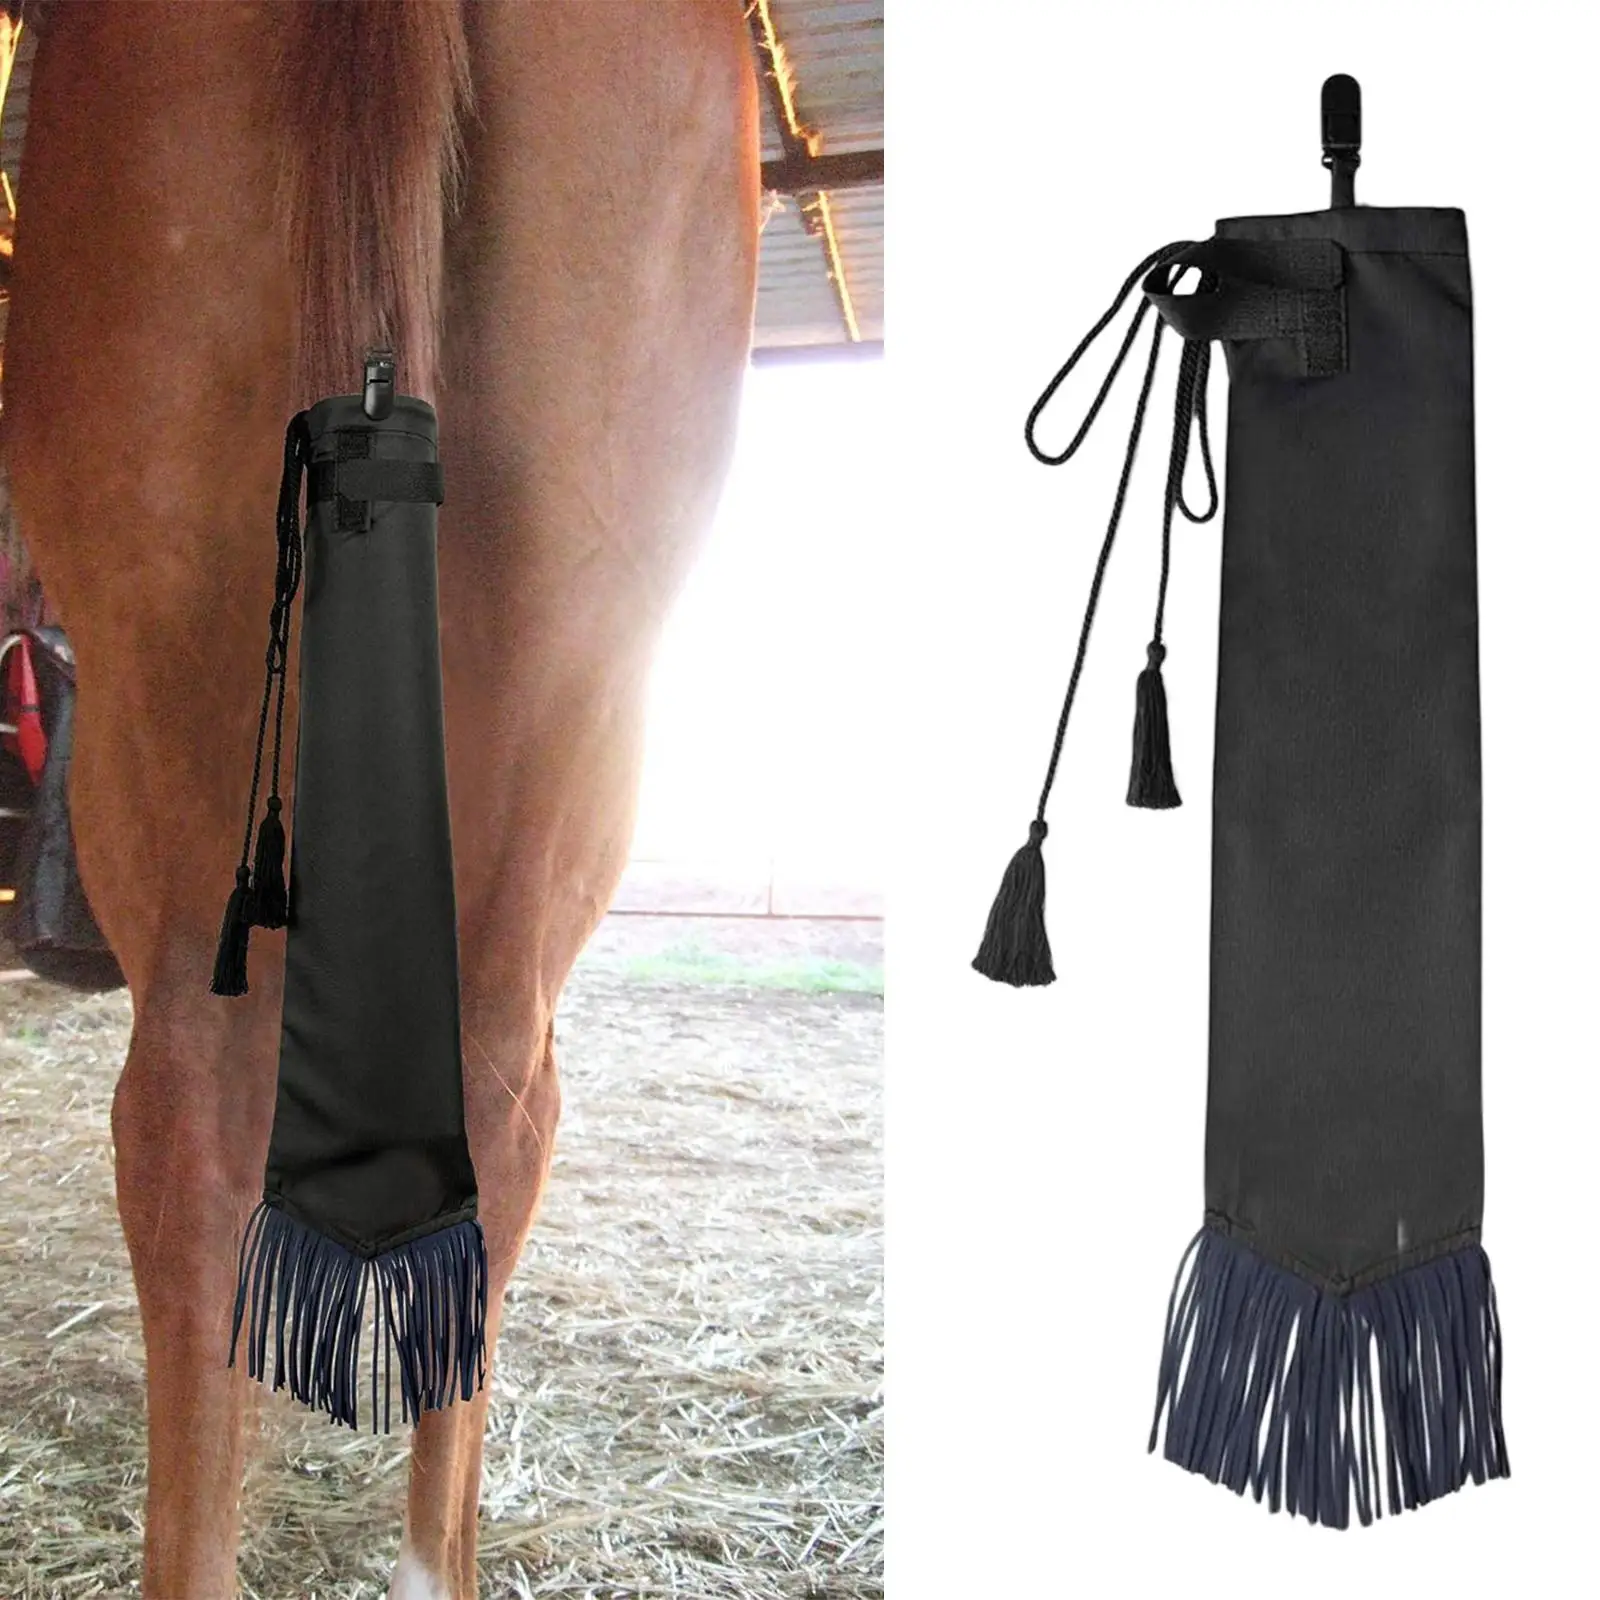 Horse Tail Bag Protector Wrap Black with Fringe Protect Tail for Supplies